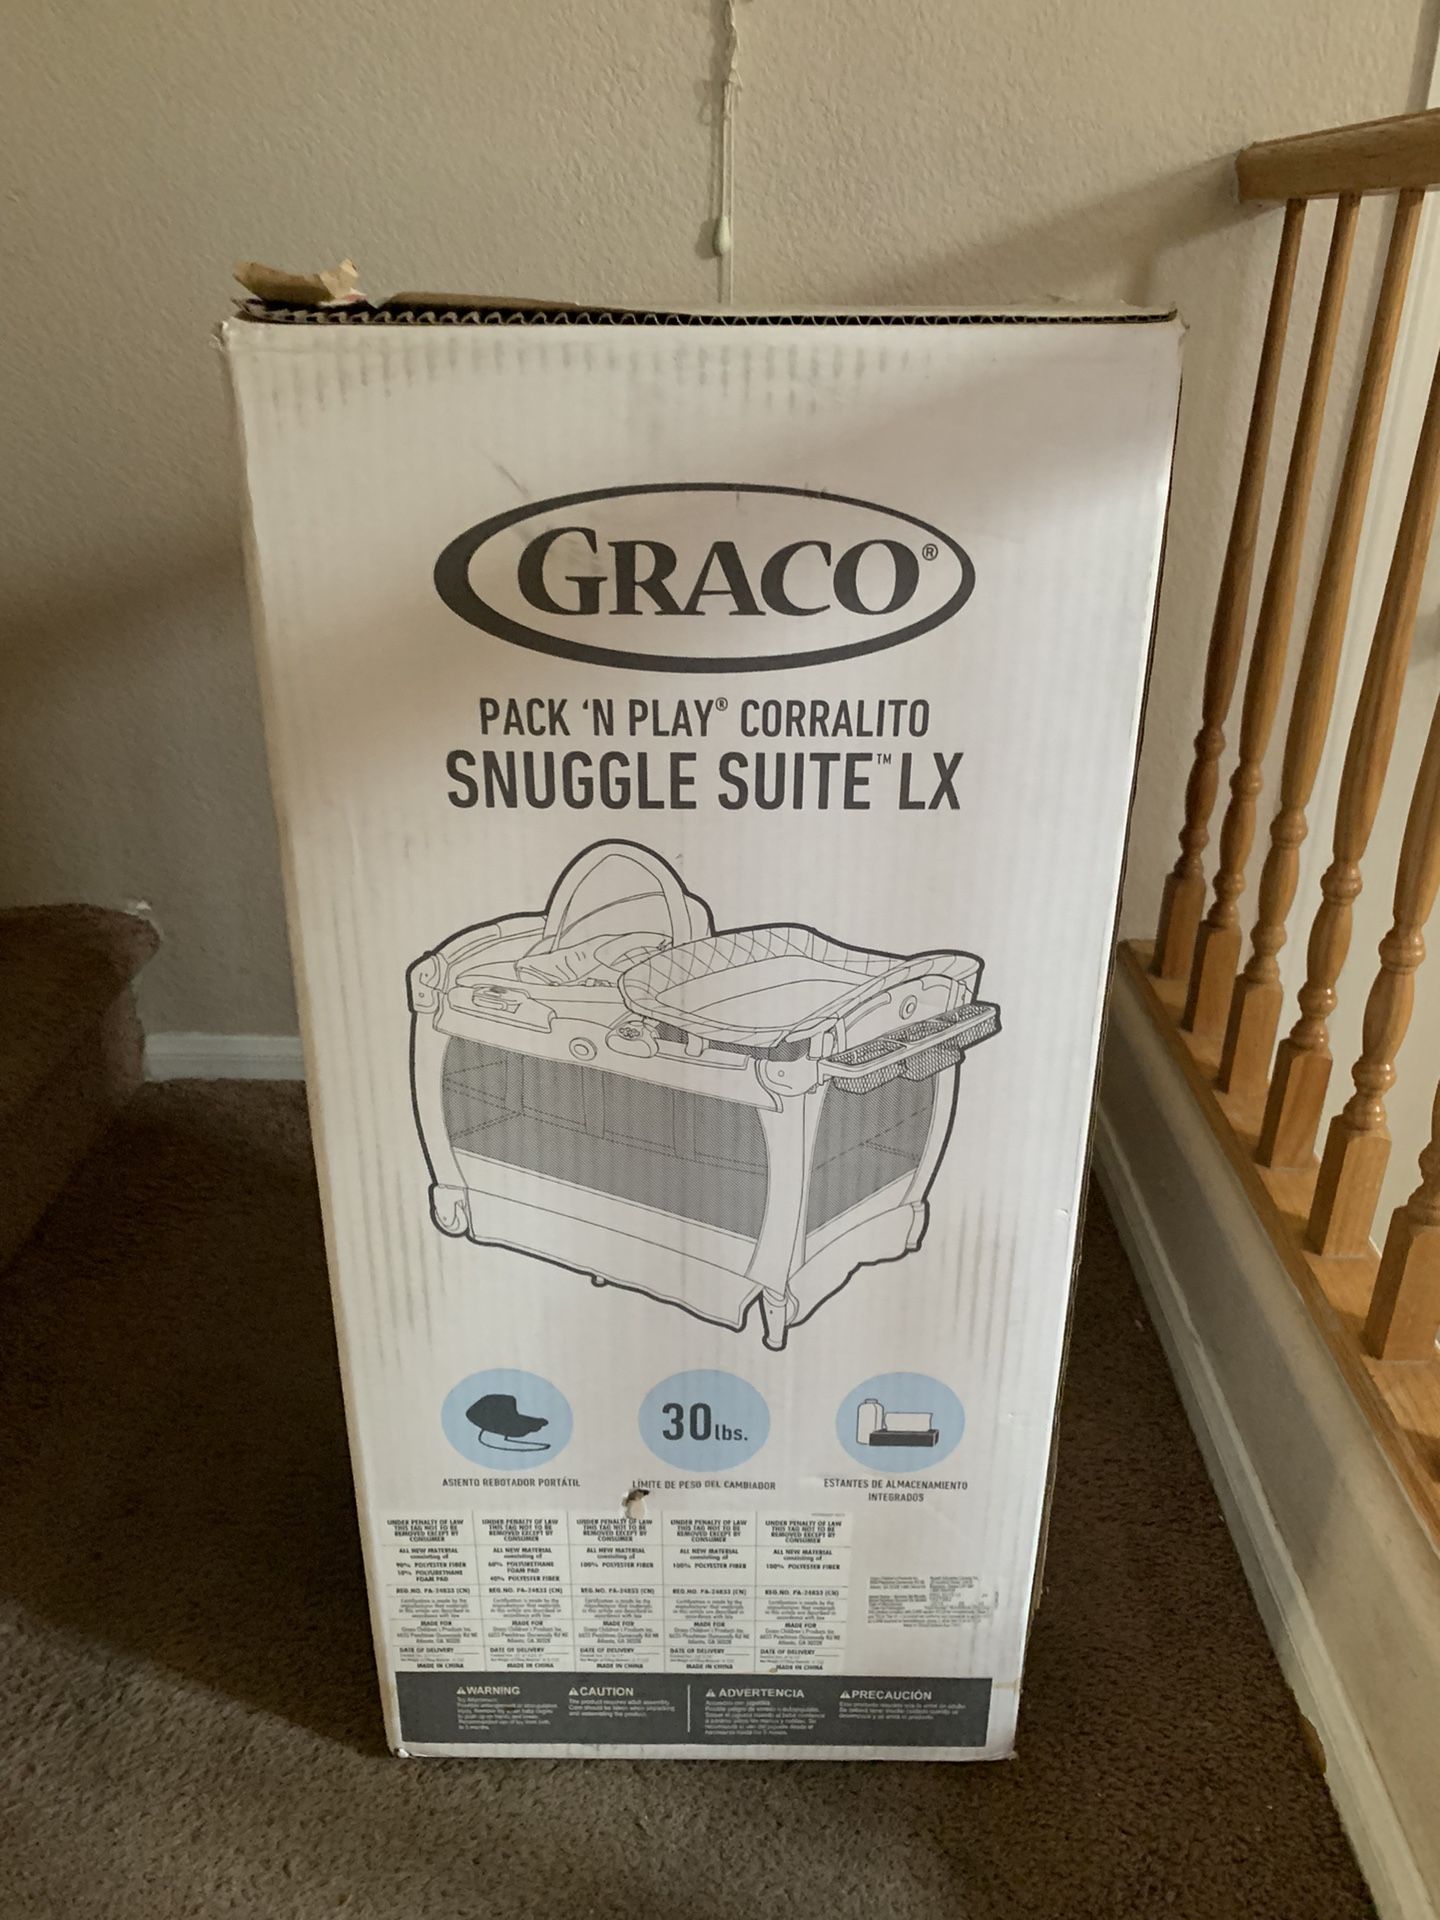 New GRACO Pack ‘N Play Snuggle Suite LX